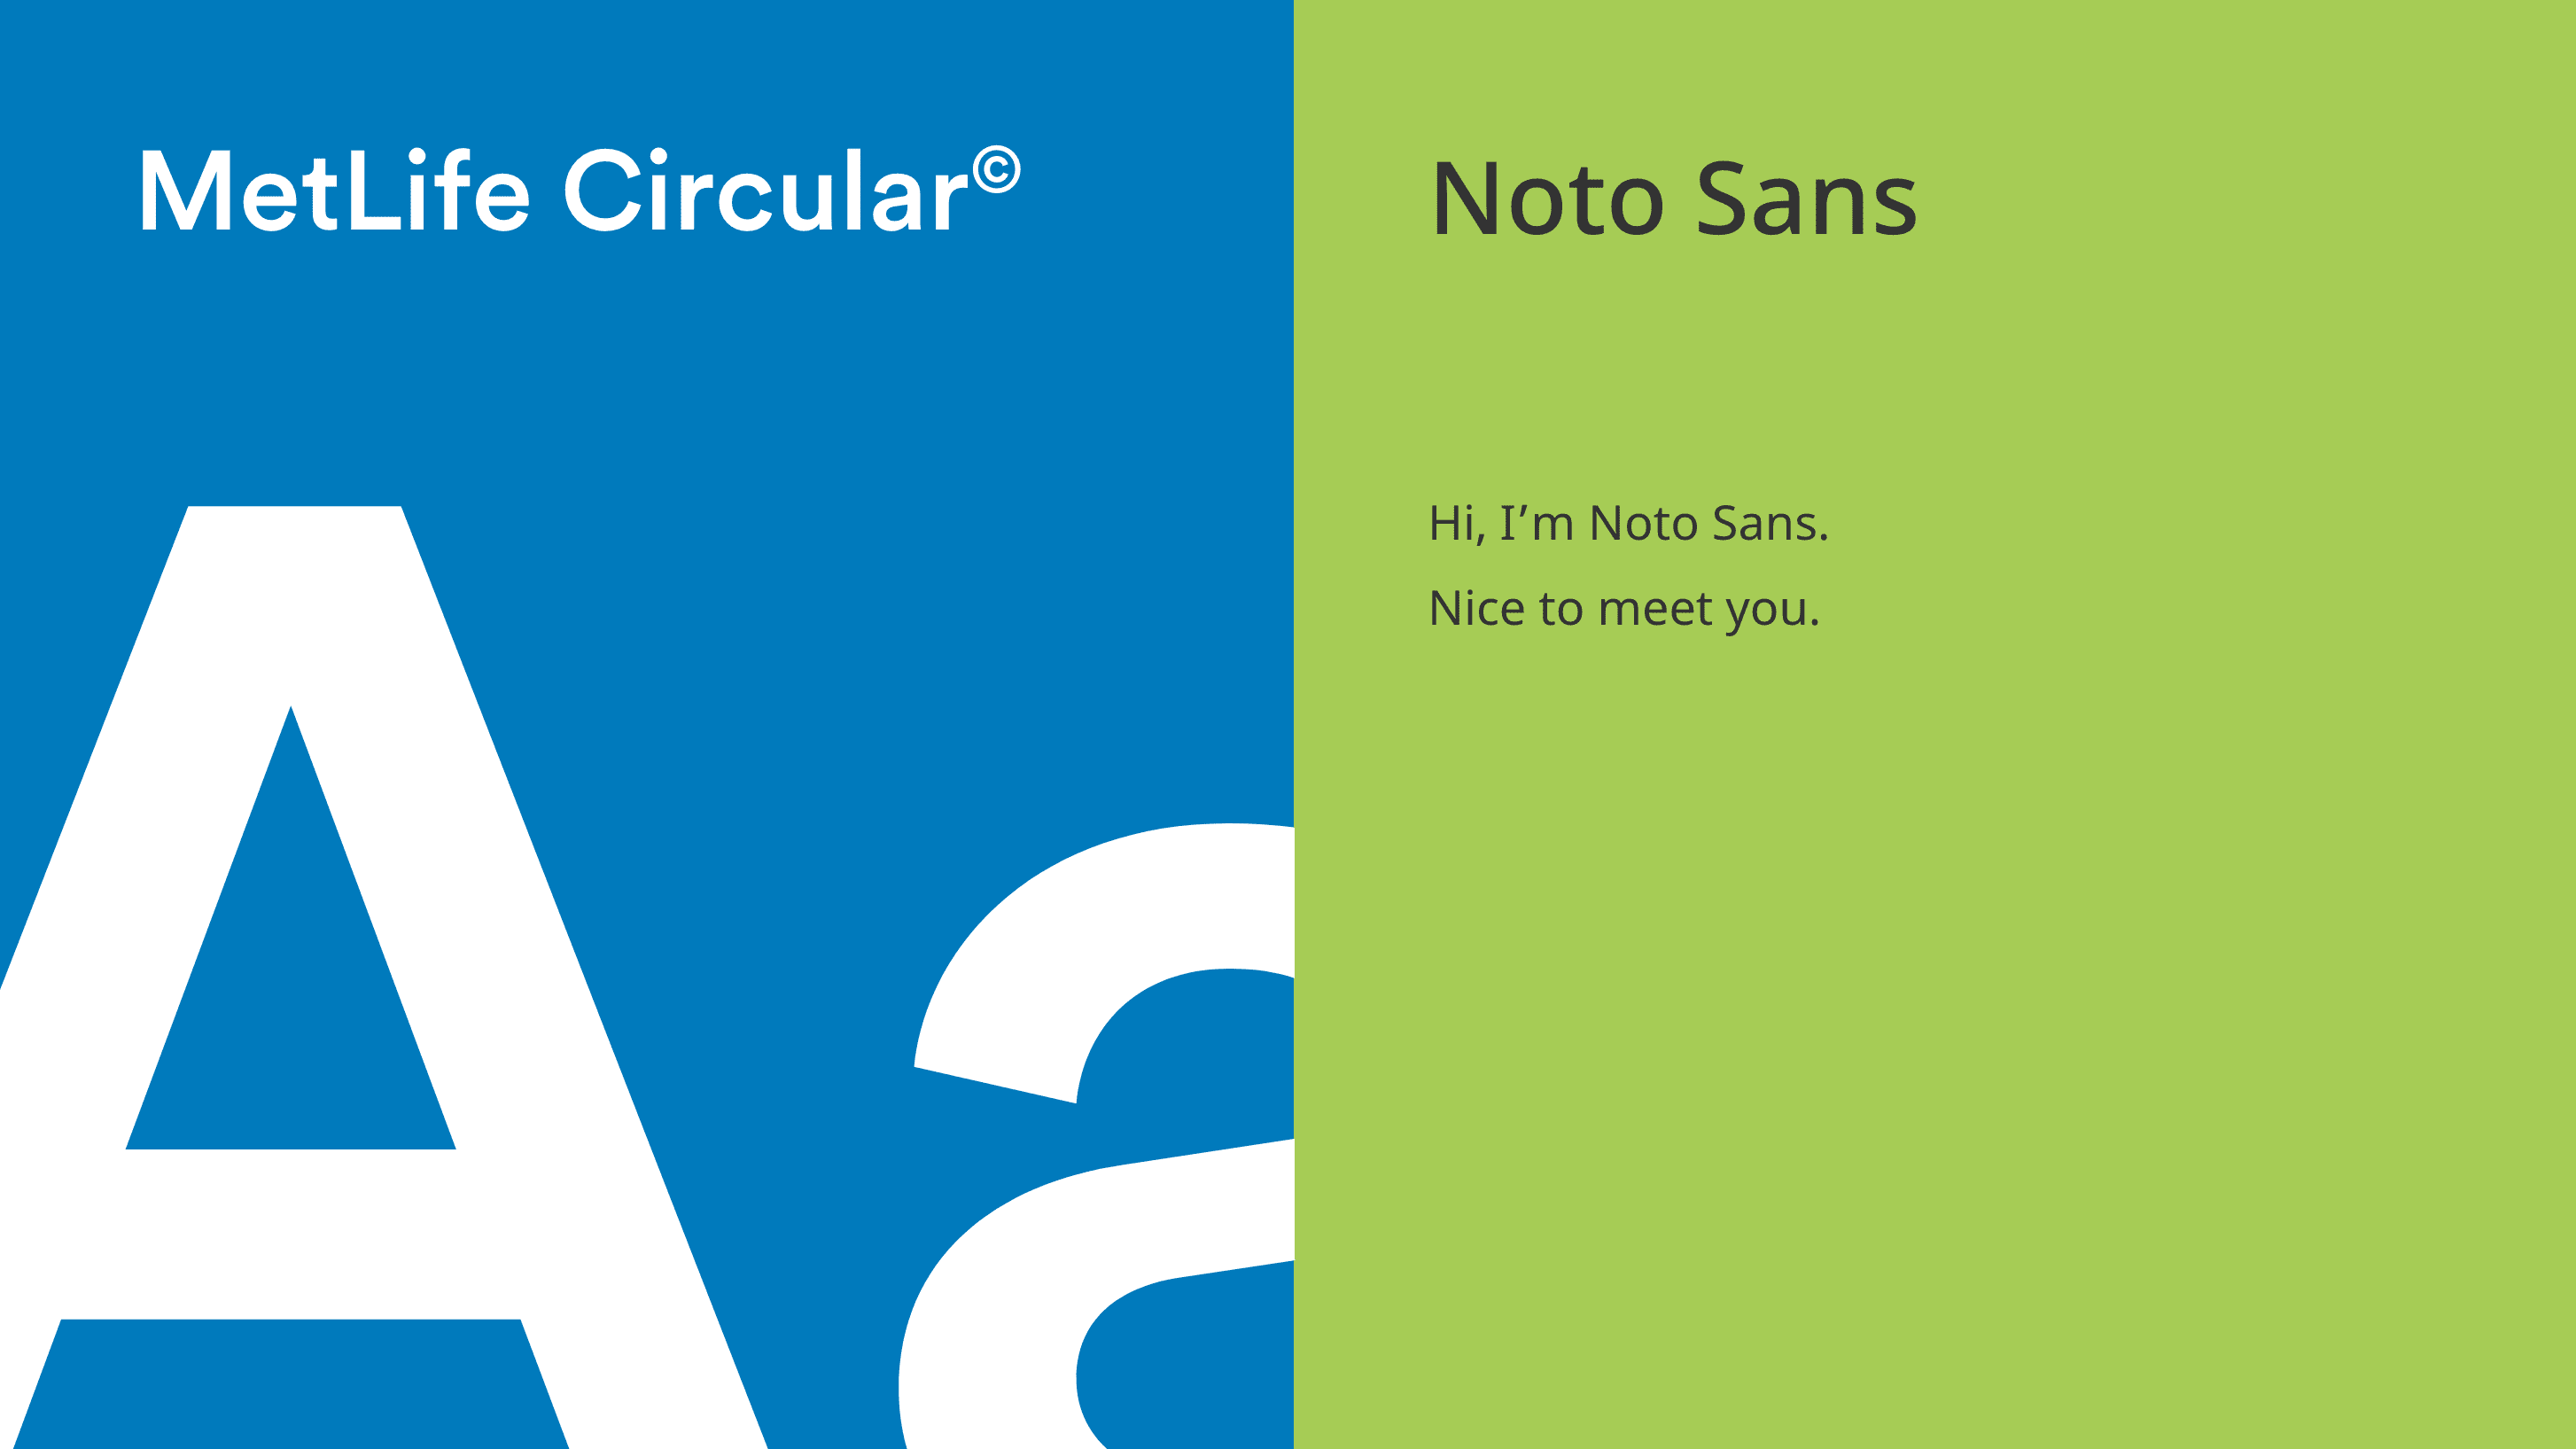 MetLife Circular font and Noto Sans font side by side.